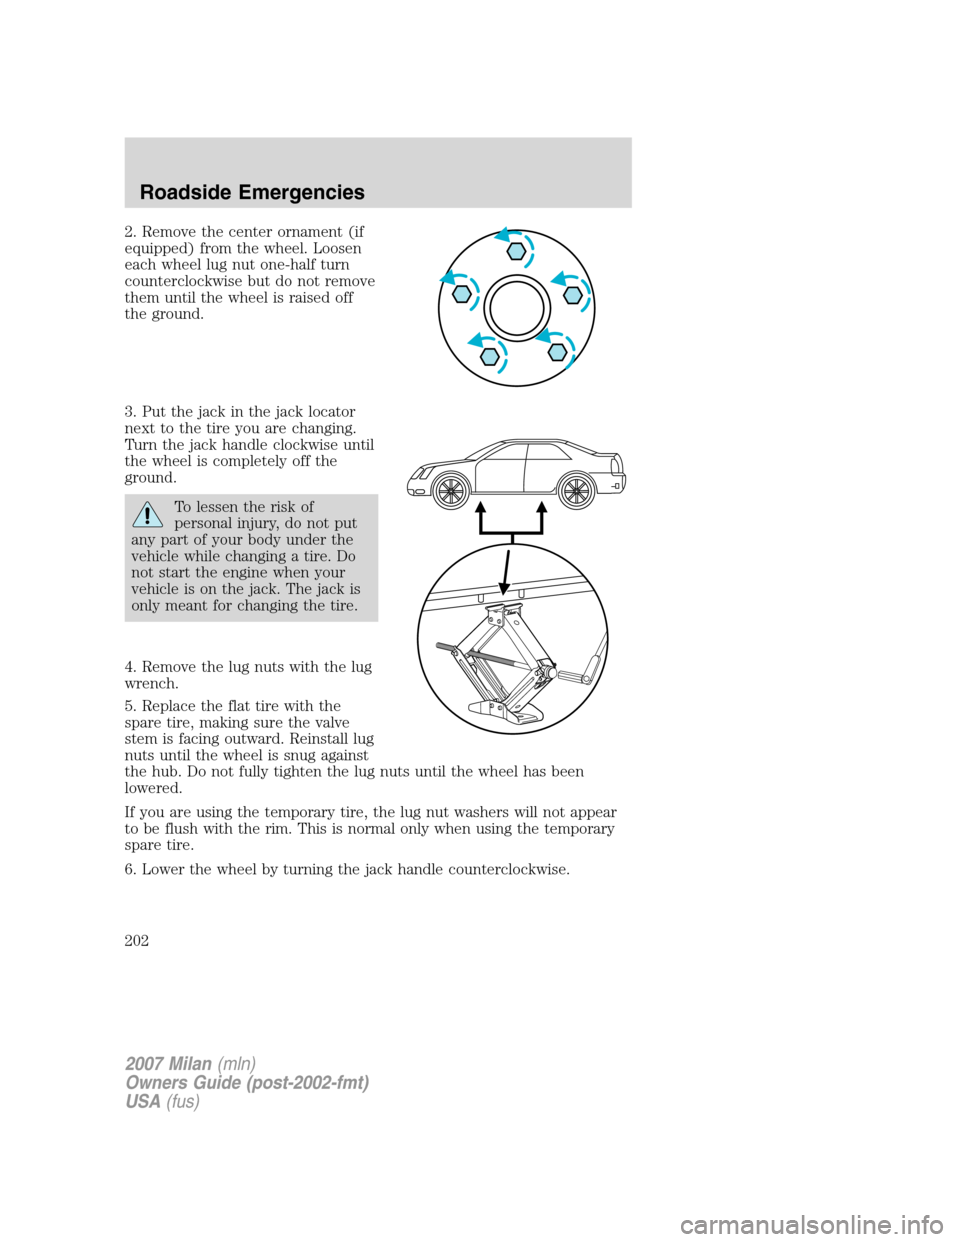 Mercury Milan 2007  Owners Manuals 2. Remove the center ornament (if
equipped) from the wheel. Loosen
each wheel lug nut one-half turn
counterclockwise but do not remove
them until the wheel is raised off
the ground.
3. Put the jack in